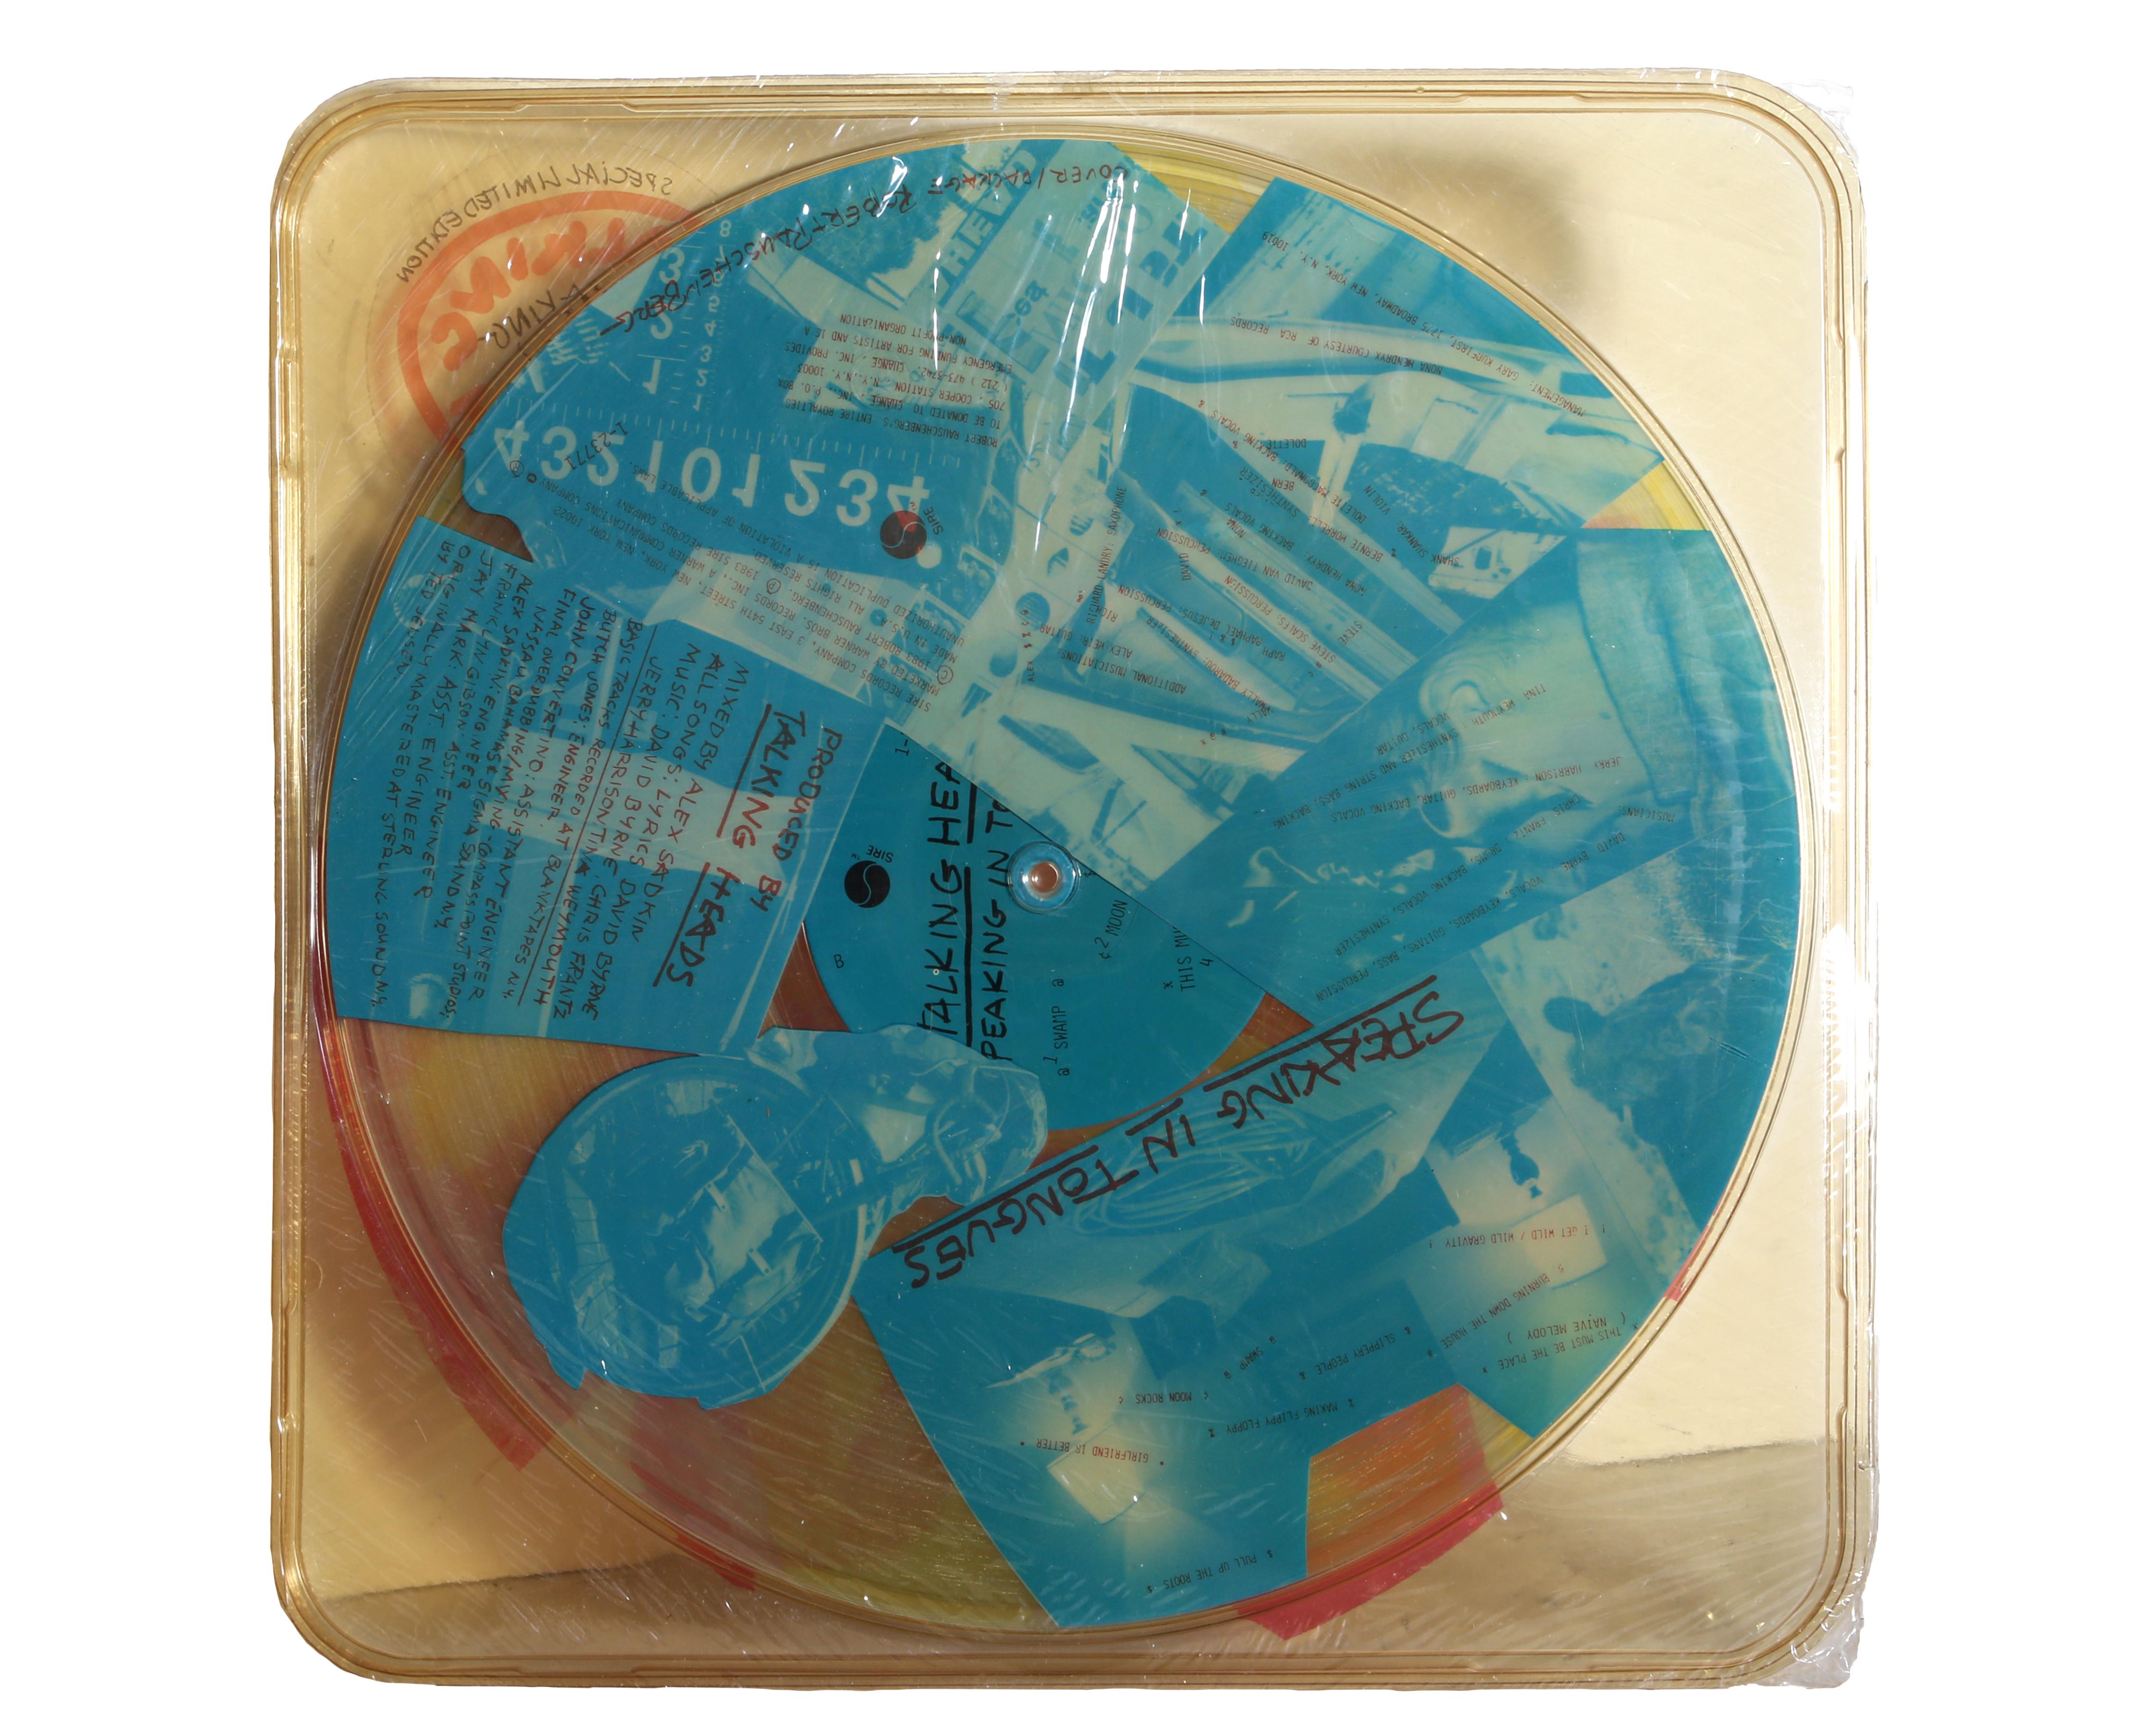 Robert Rauschenberg was an American painter and graphic artist, he incorporated everyday objects and used them as art materials. This vinyl record was a collaboration between Robert Rauschenberg and The Talking Heads. Rauschenberg created the design